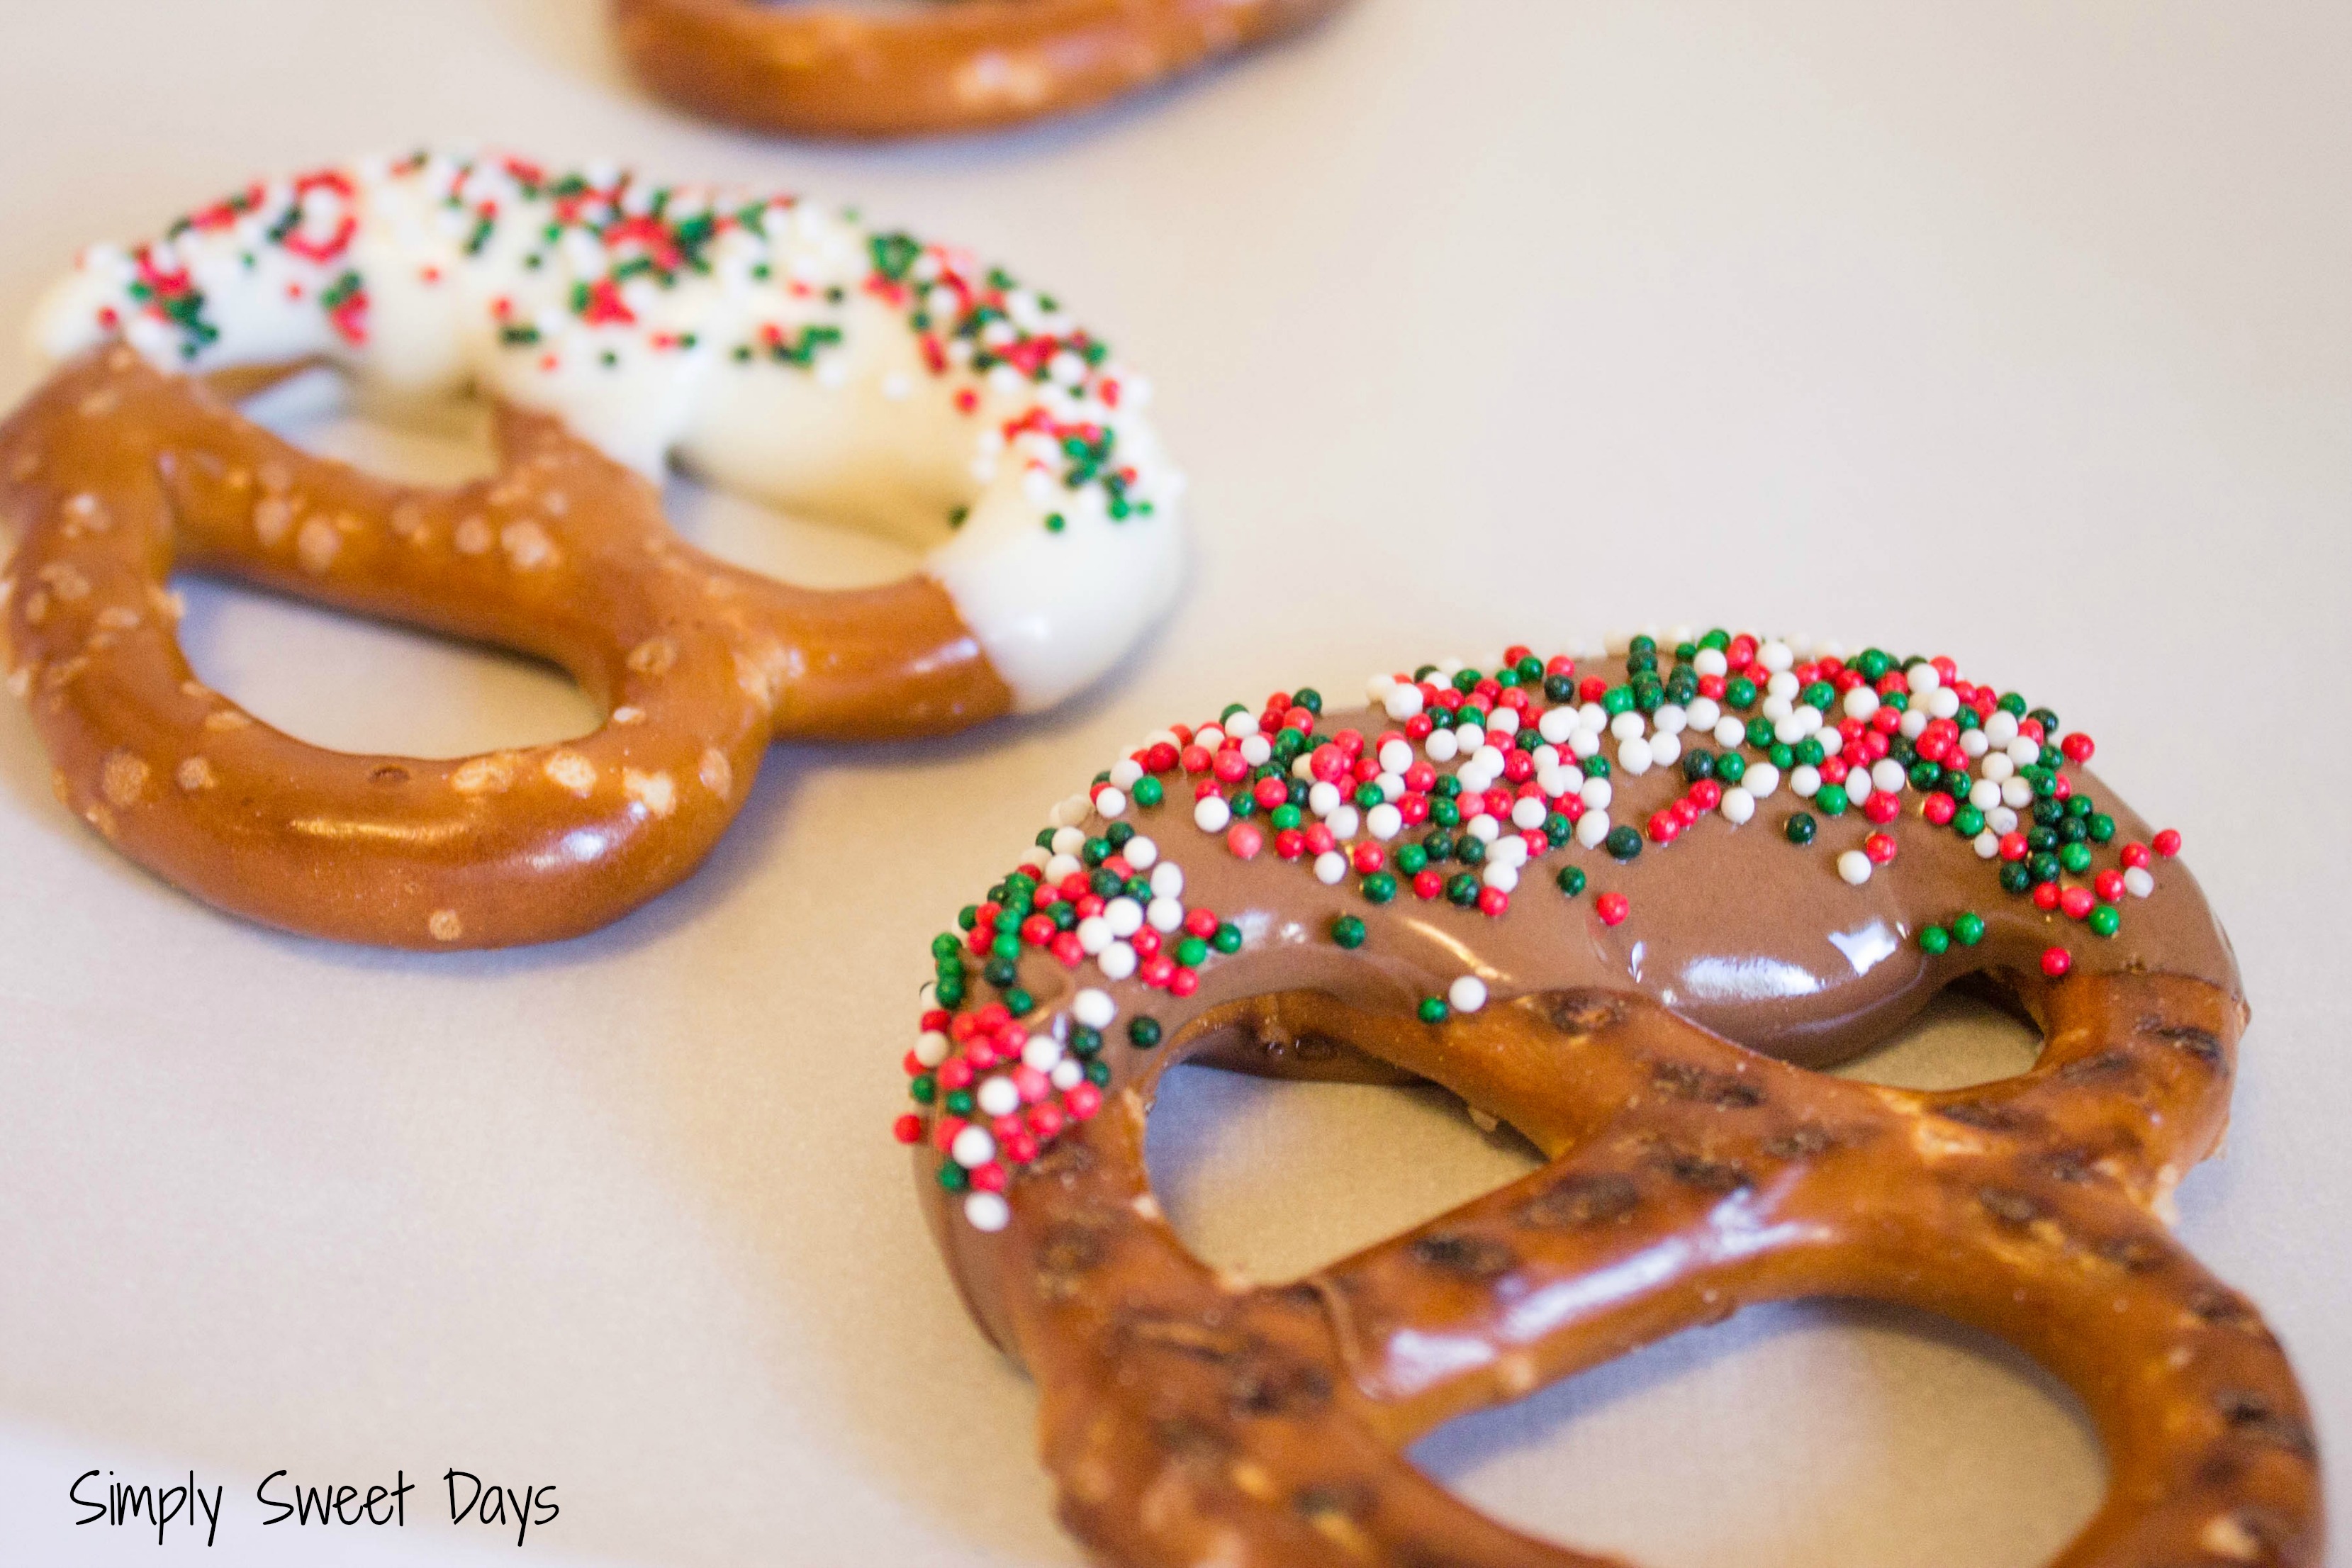 these-simple-chocolate-dipped-pretzle-smake-a-great-diy-christmas-gift